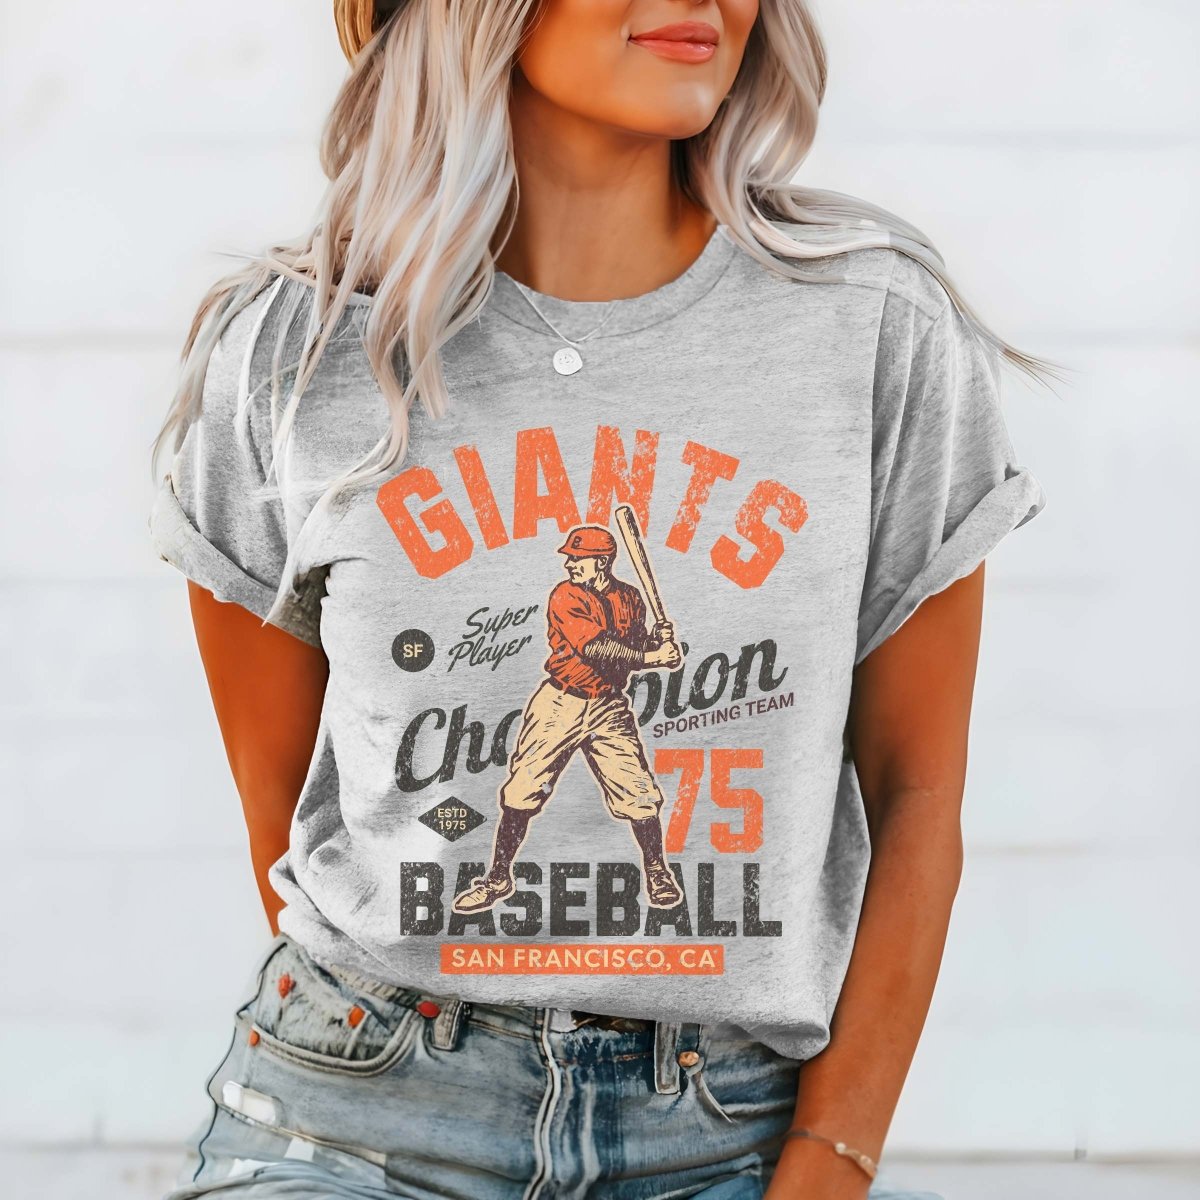 Giants Vintage Baseball Team Wholesale Tee - Fast Shipping - Limeberry Designs